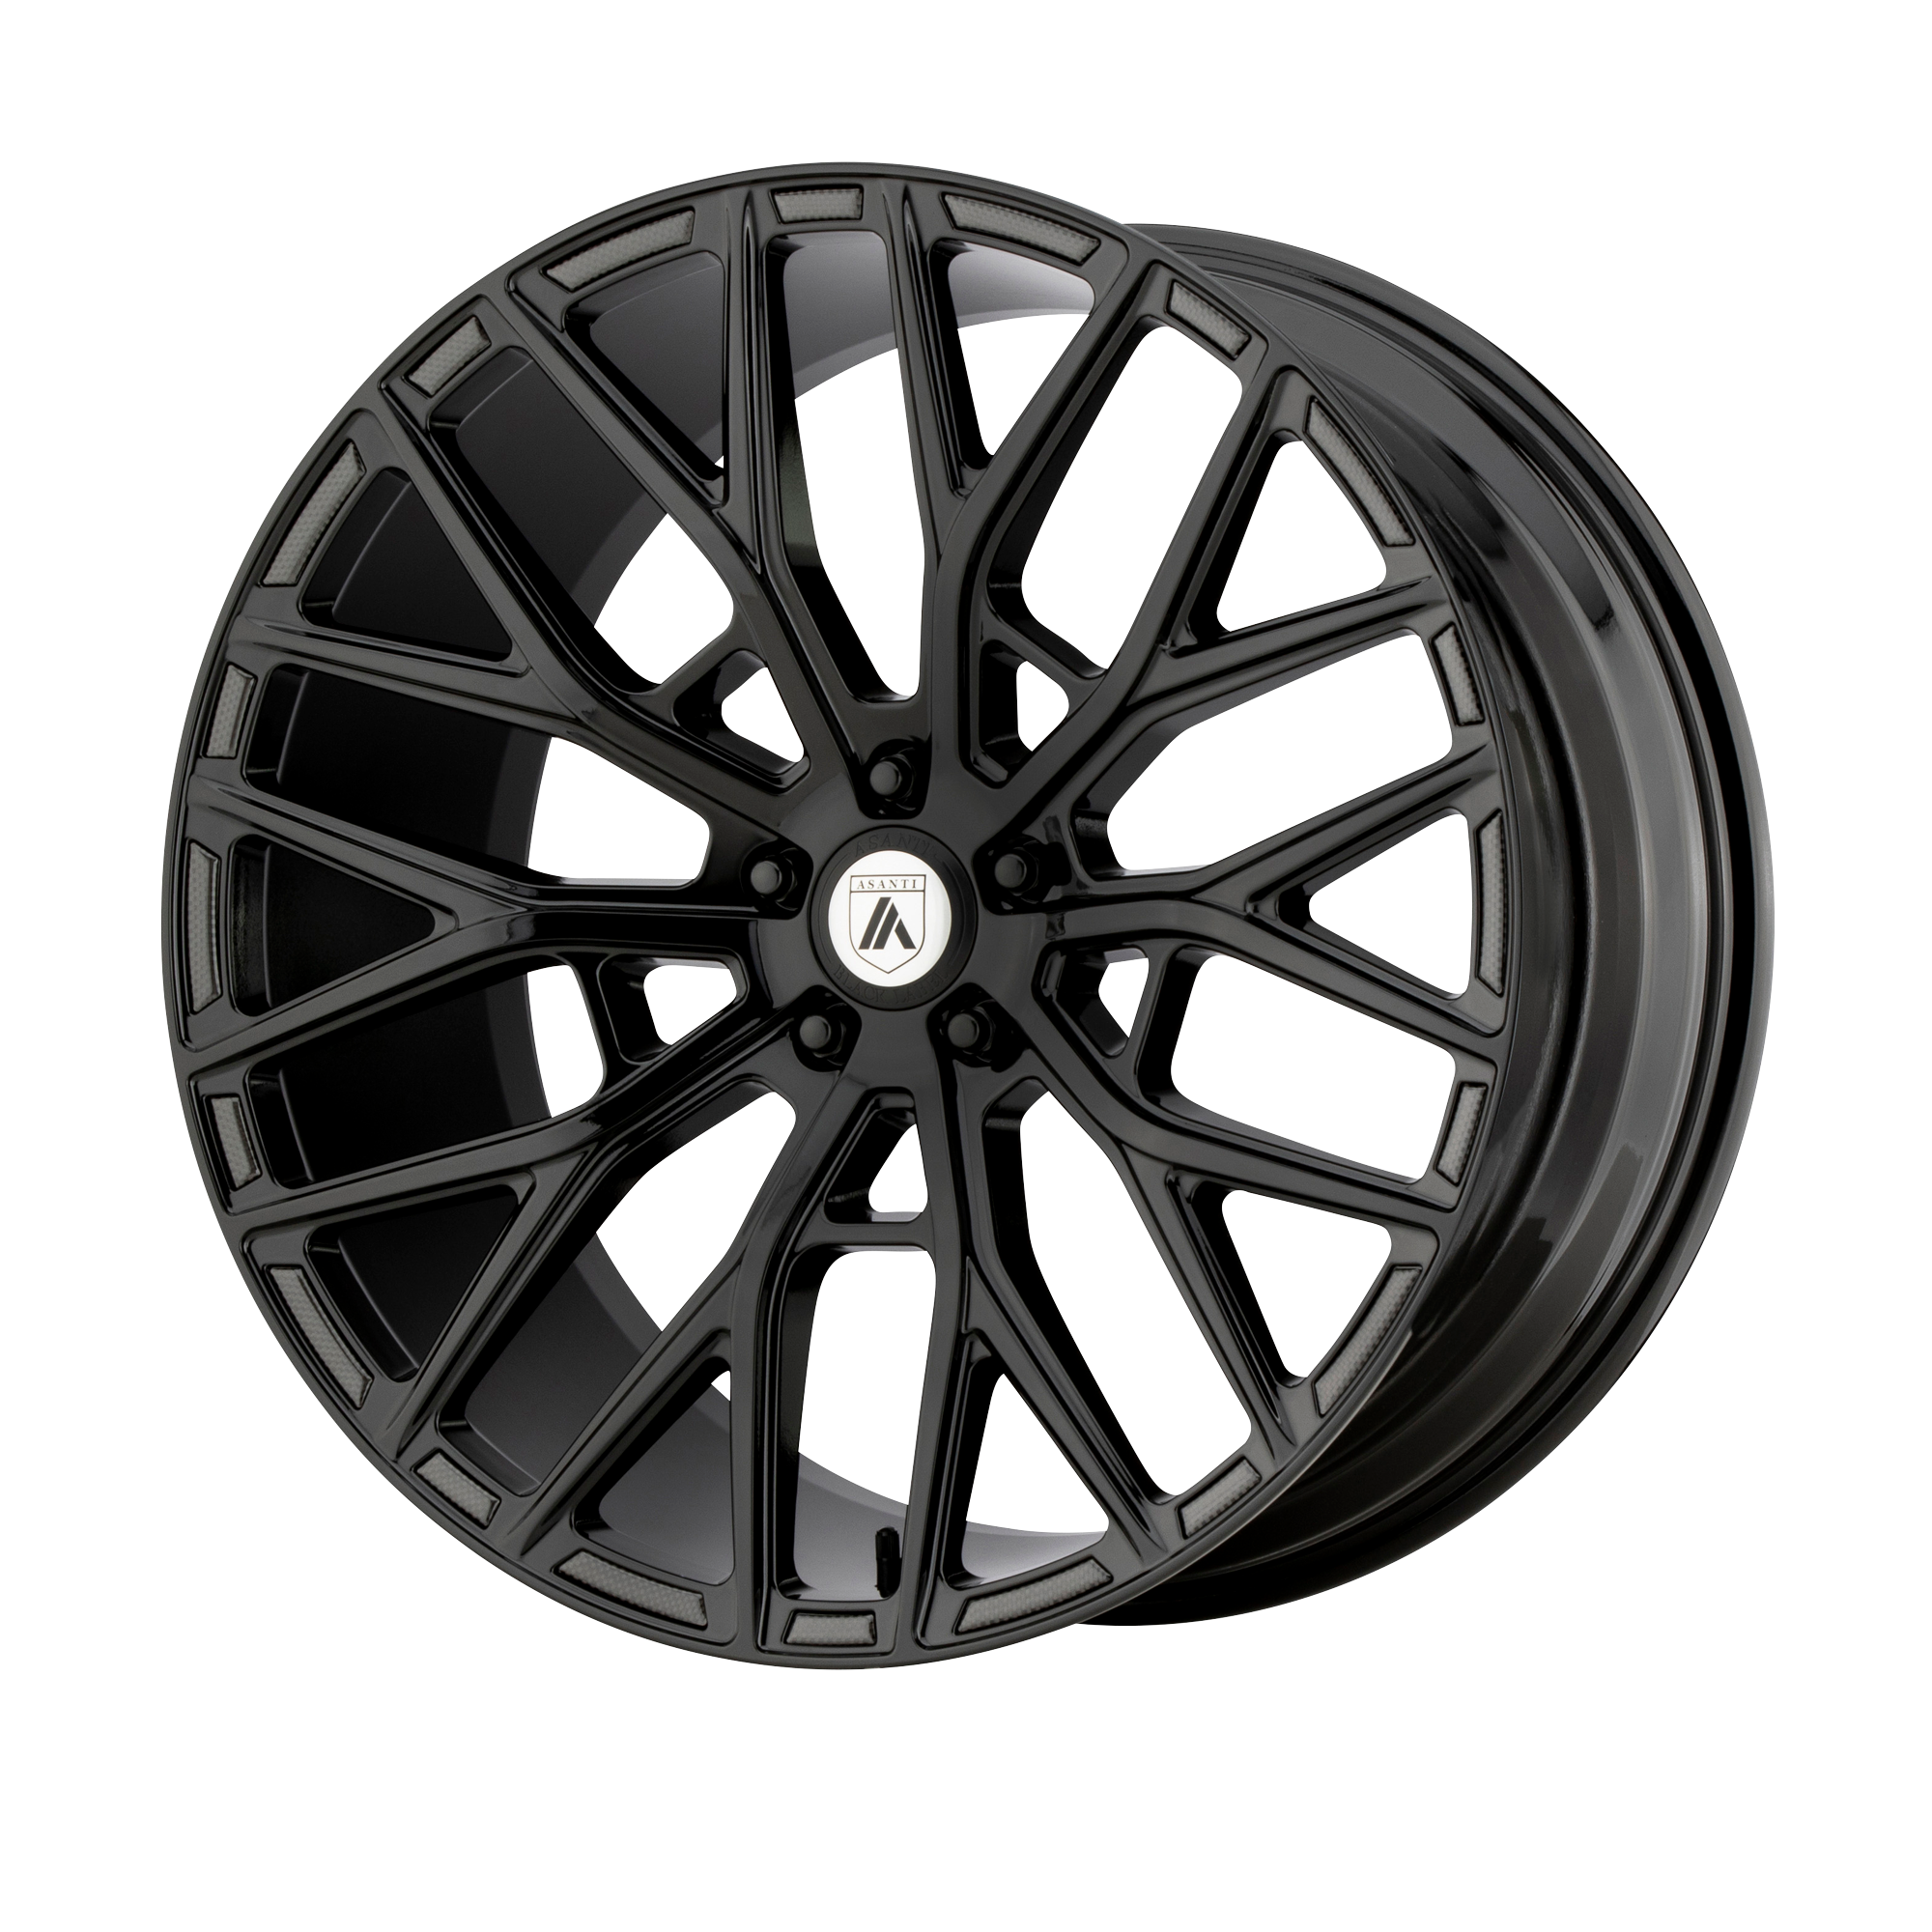 LEO 20x10.5 Blank GLOSS BLACK (38 mm) - Tires and Engine Performance